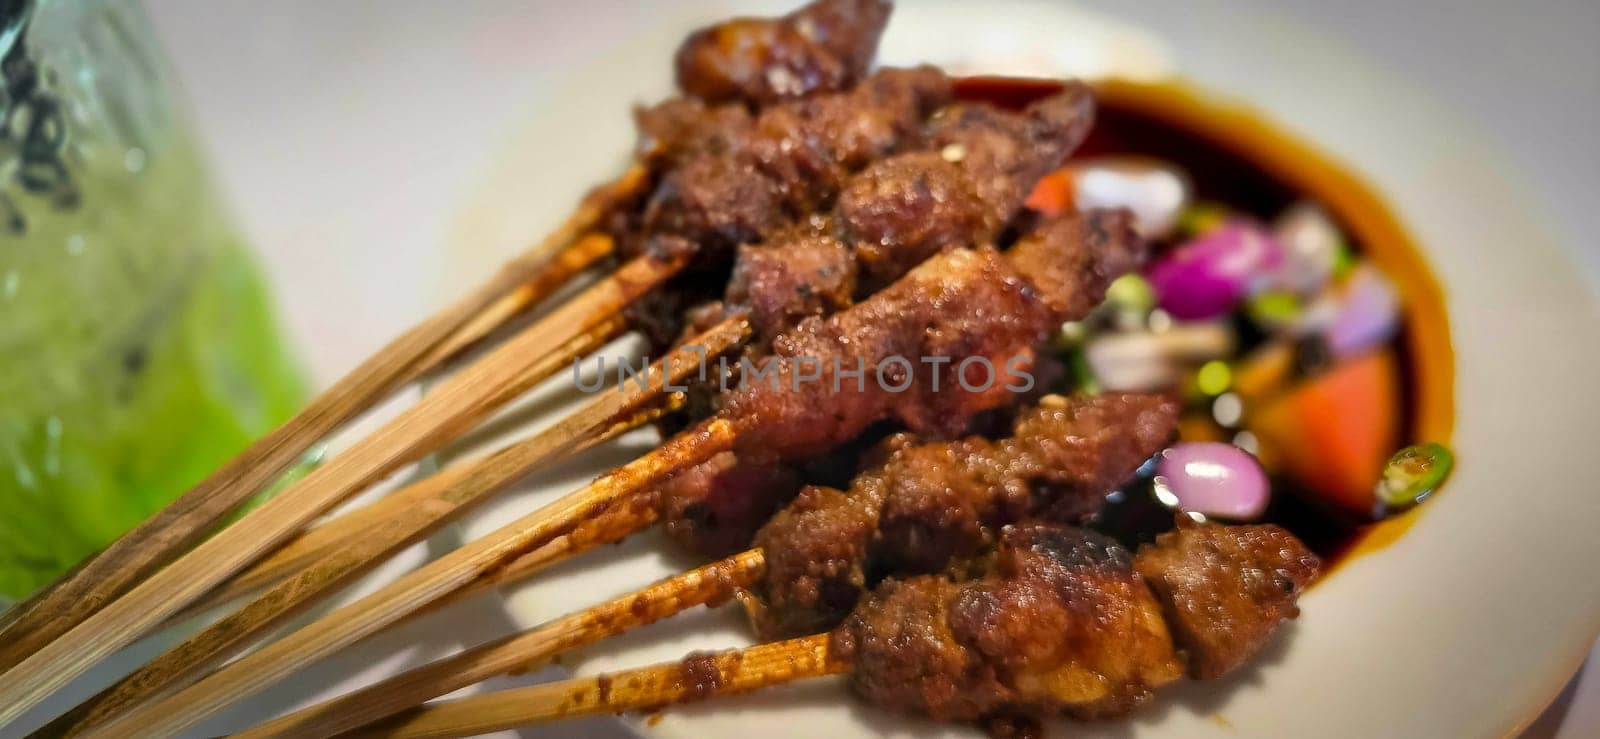 Lamb, mutton grilled skewer satay served with soy sauce sauce with sliced shallots, tomatoes, cucumber and cayenne pepper served in white plate